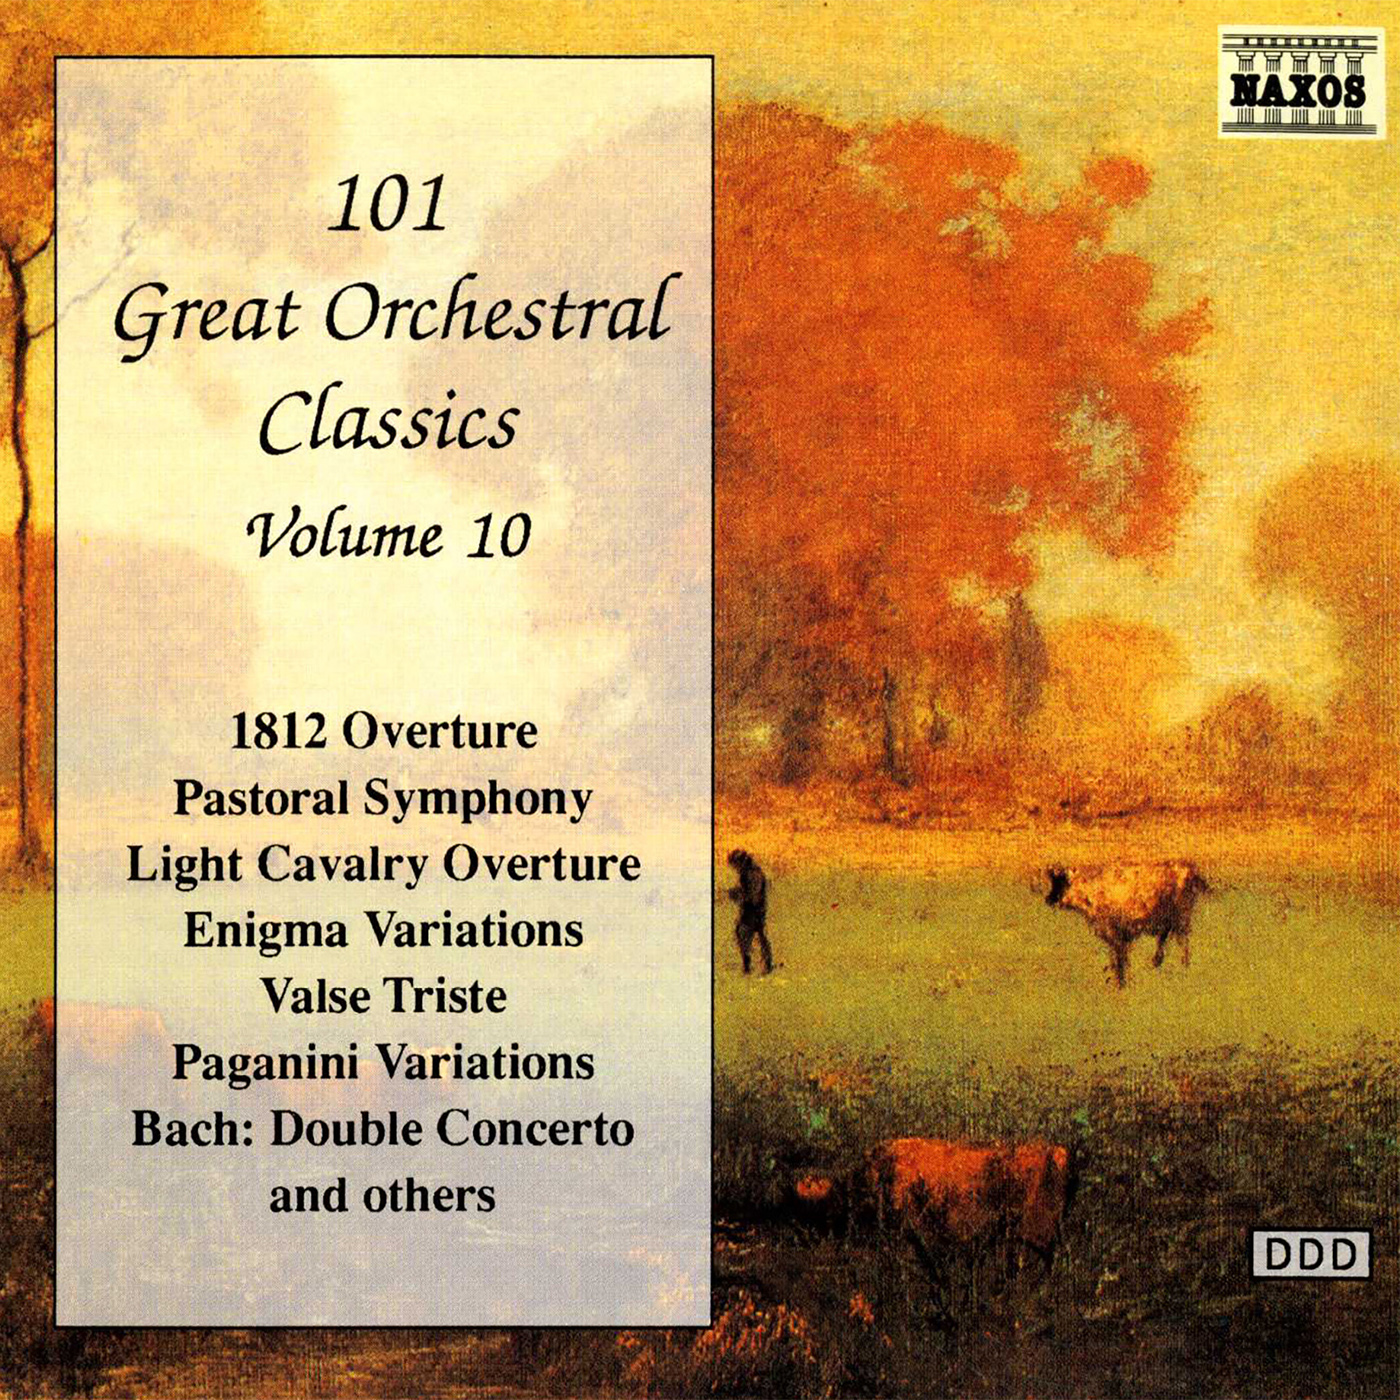 Symphony No. 94 in G Major, Hob.I:94, "The Surprise":Symphony No. 94 in G Major, Hob.I:94, "The Surprise": II. Andante